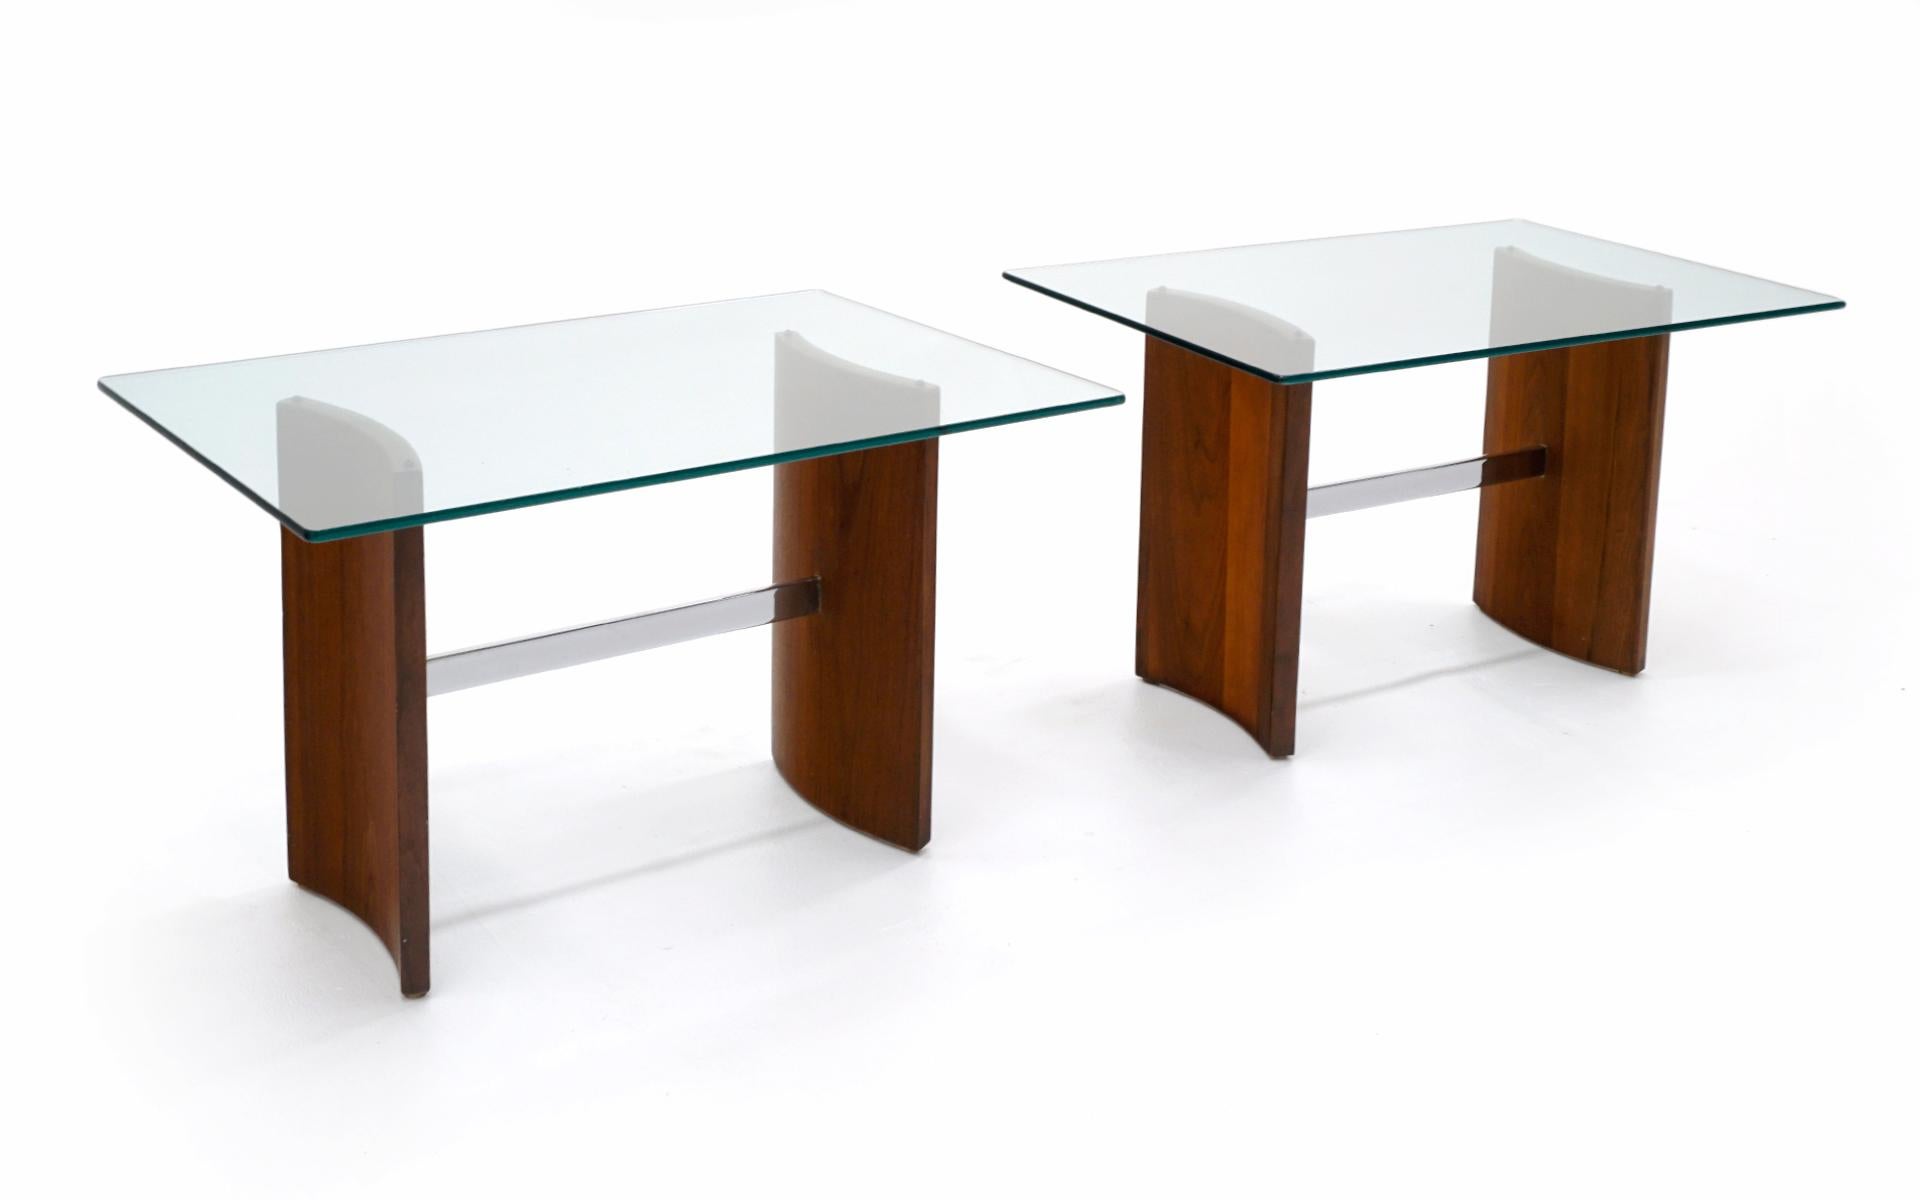 American Set of Two Side Tables and Coffee Table, Walnut, Chrome, Glass